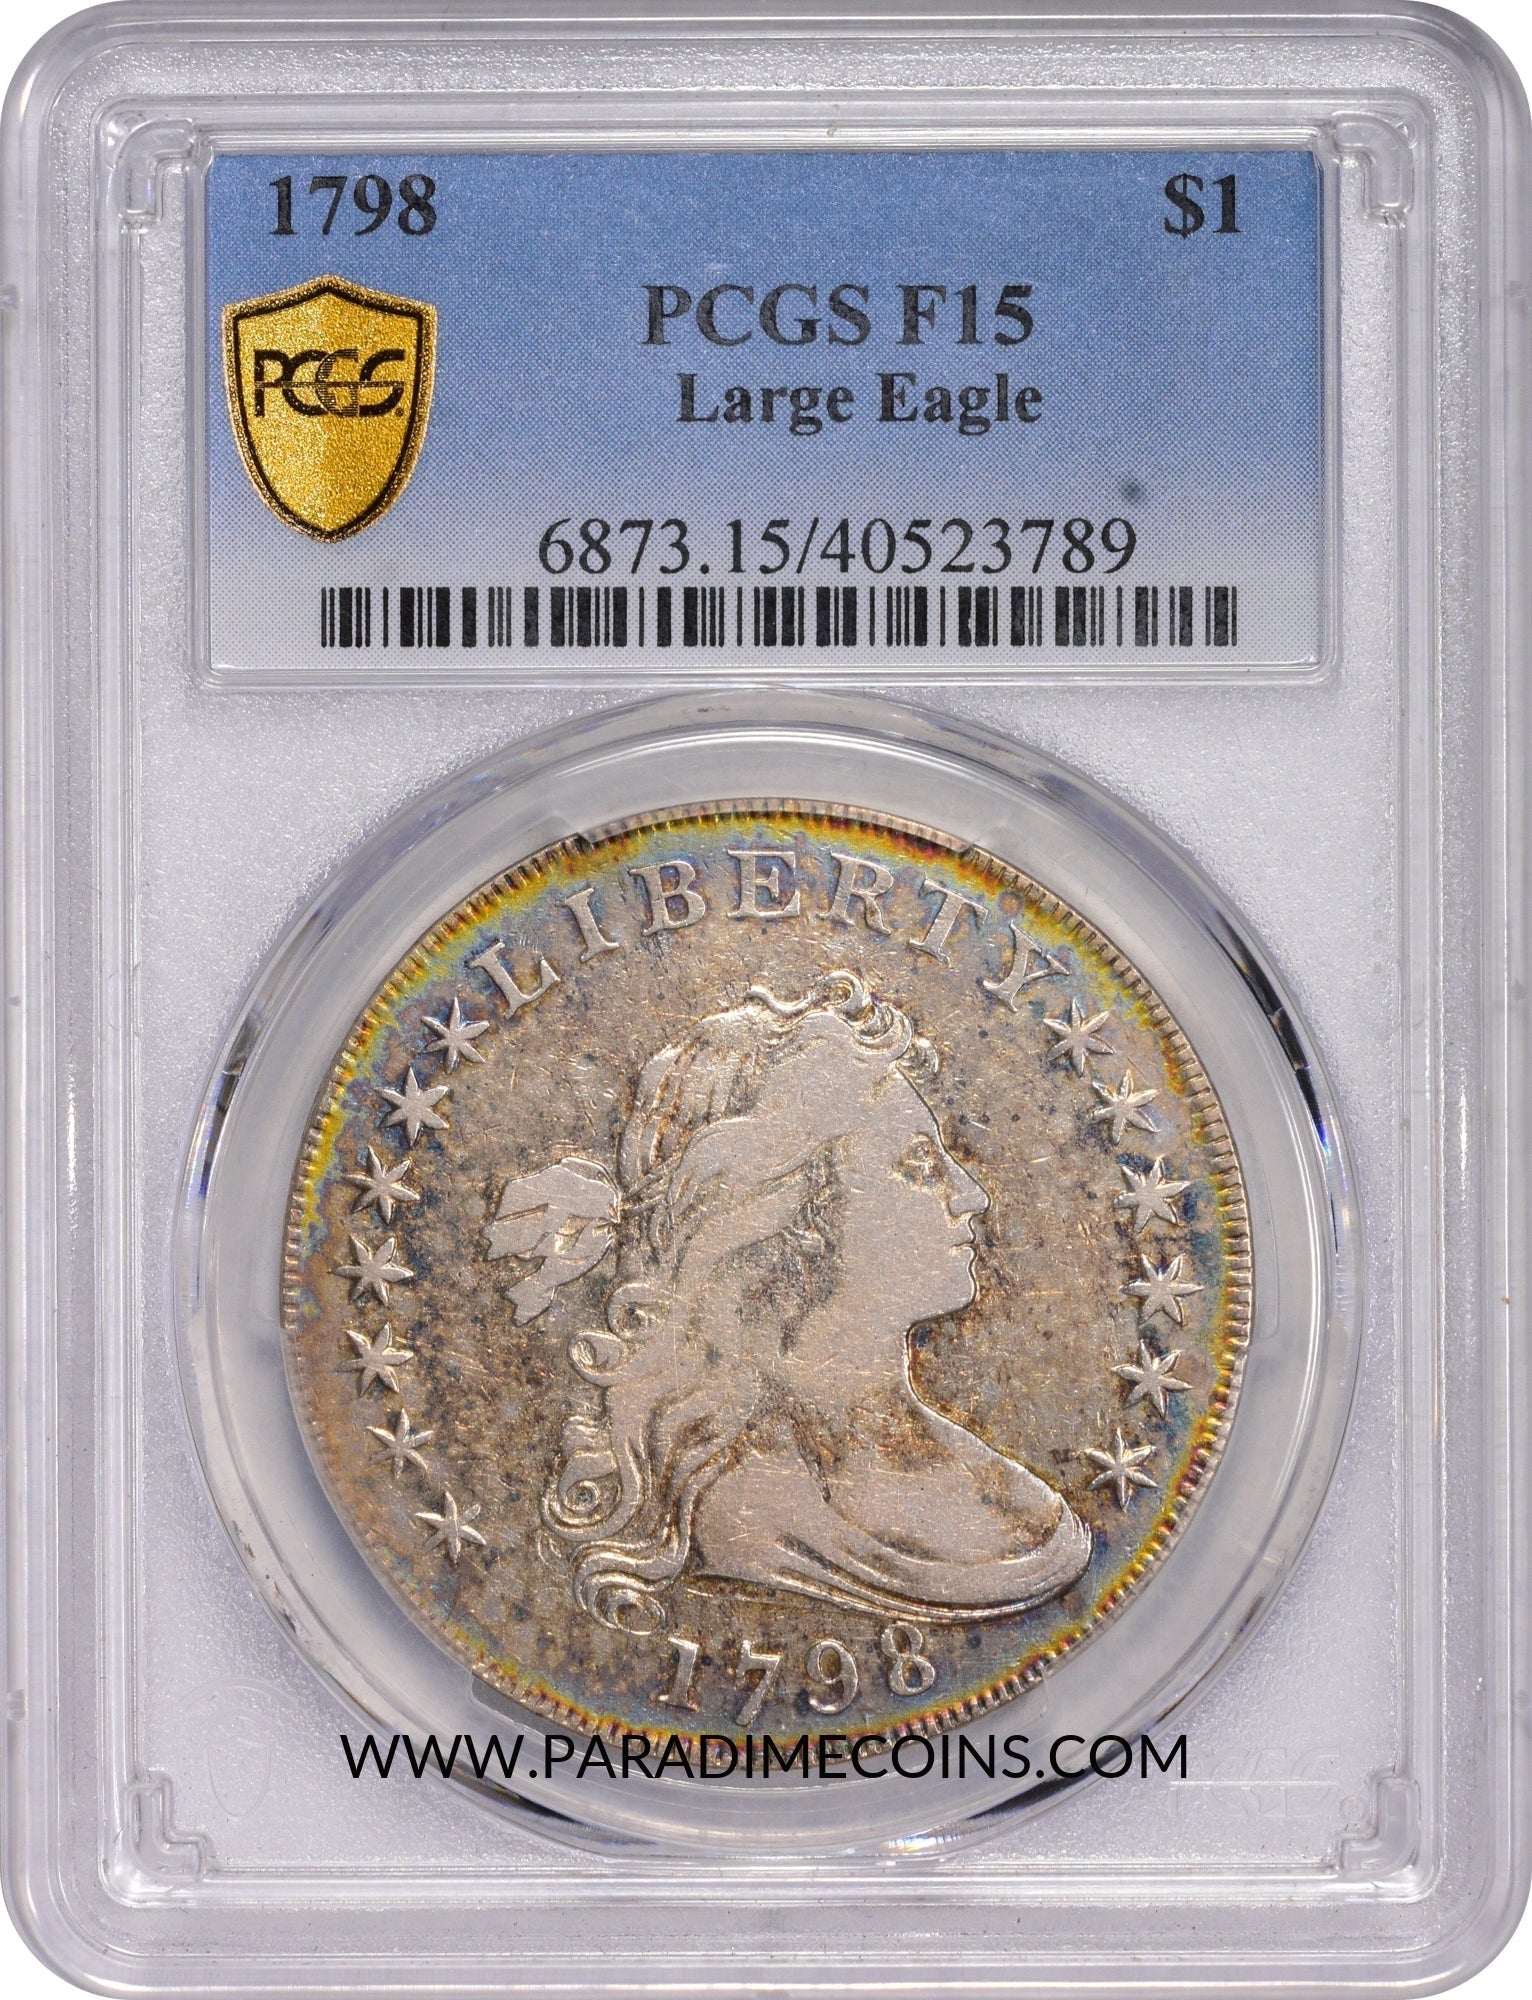 1798 $1 LARGE EAGLE F15 PCGS - Paradime Coins | PCGS NGC CACG CAC Rare US Numismatic Coins For Sale